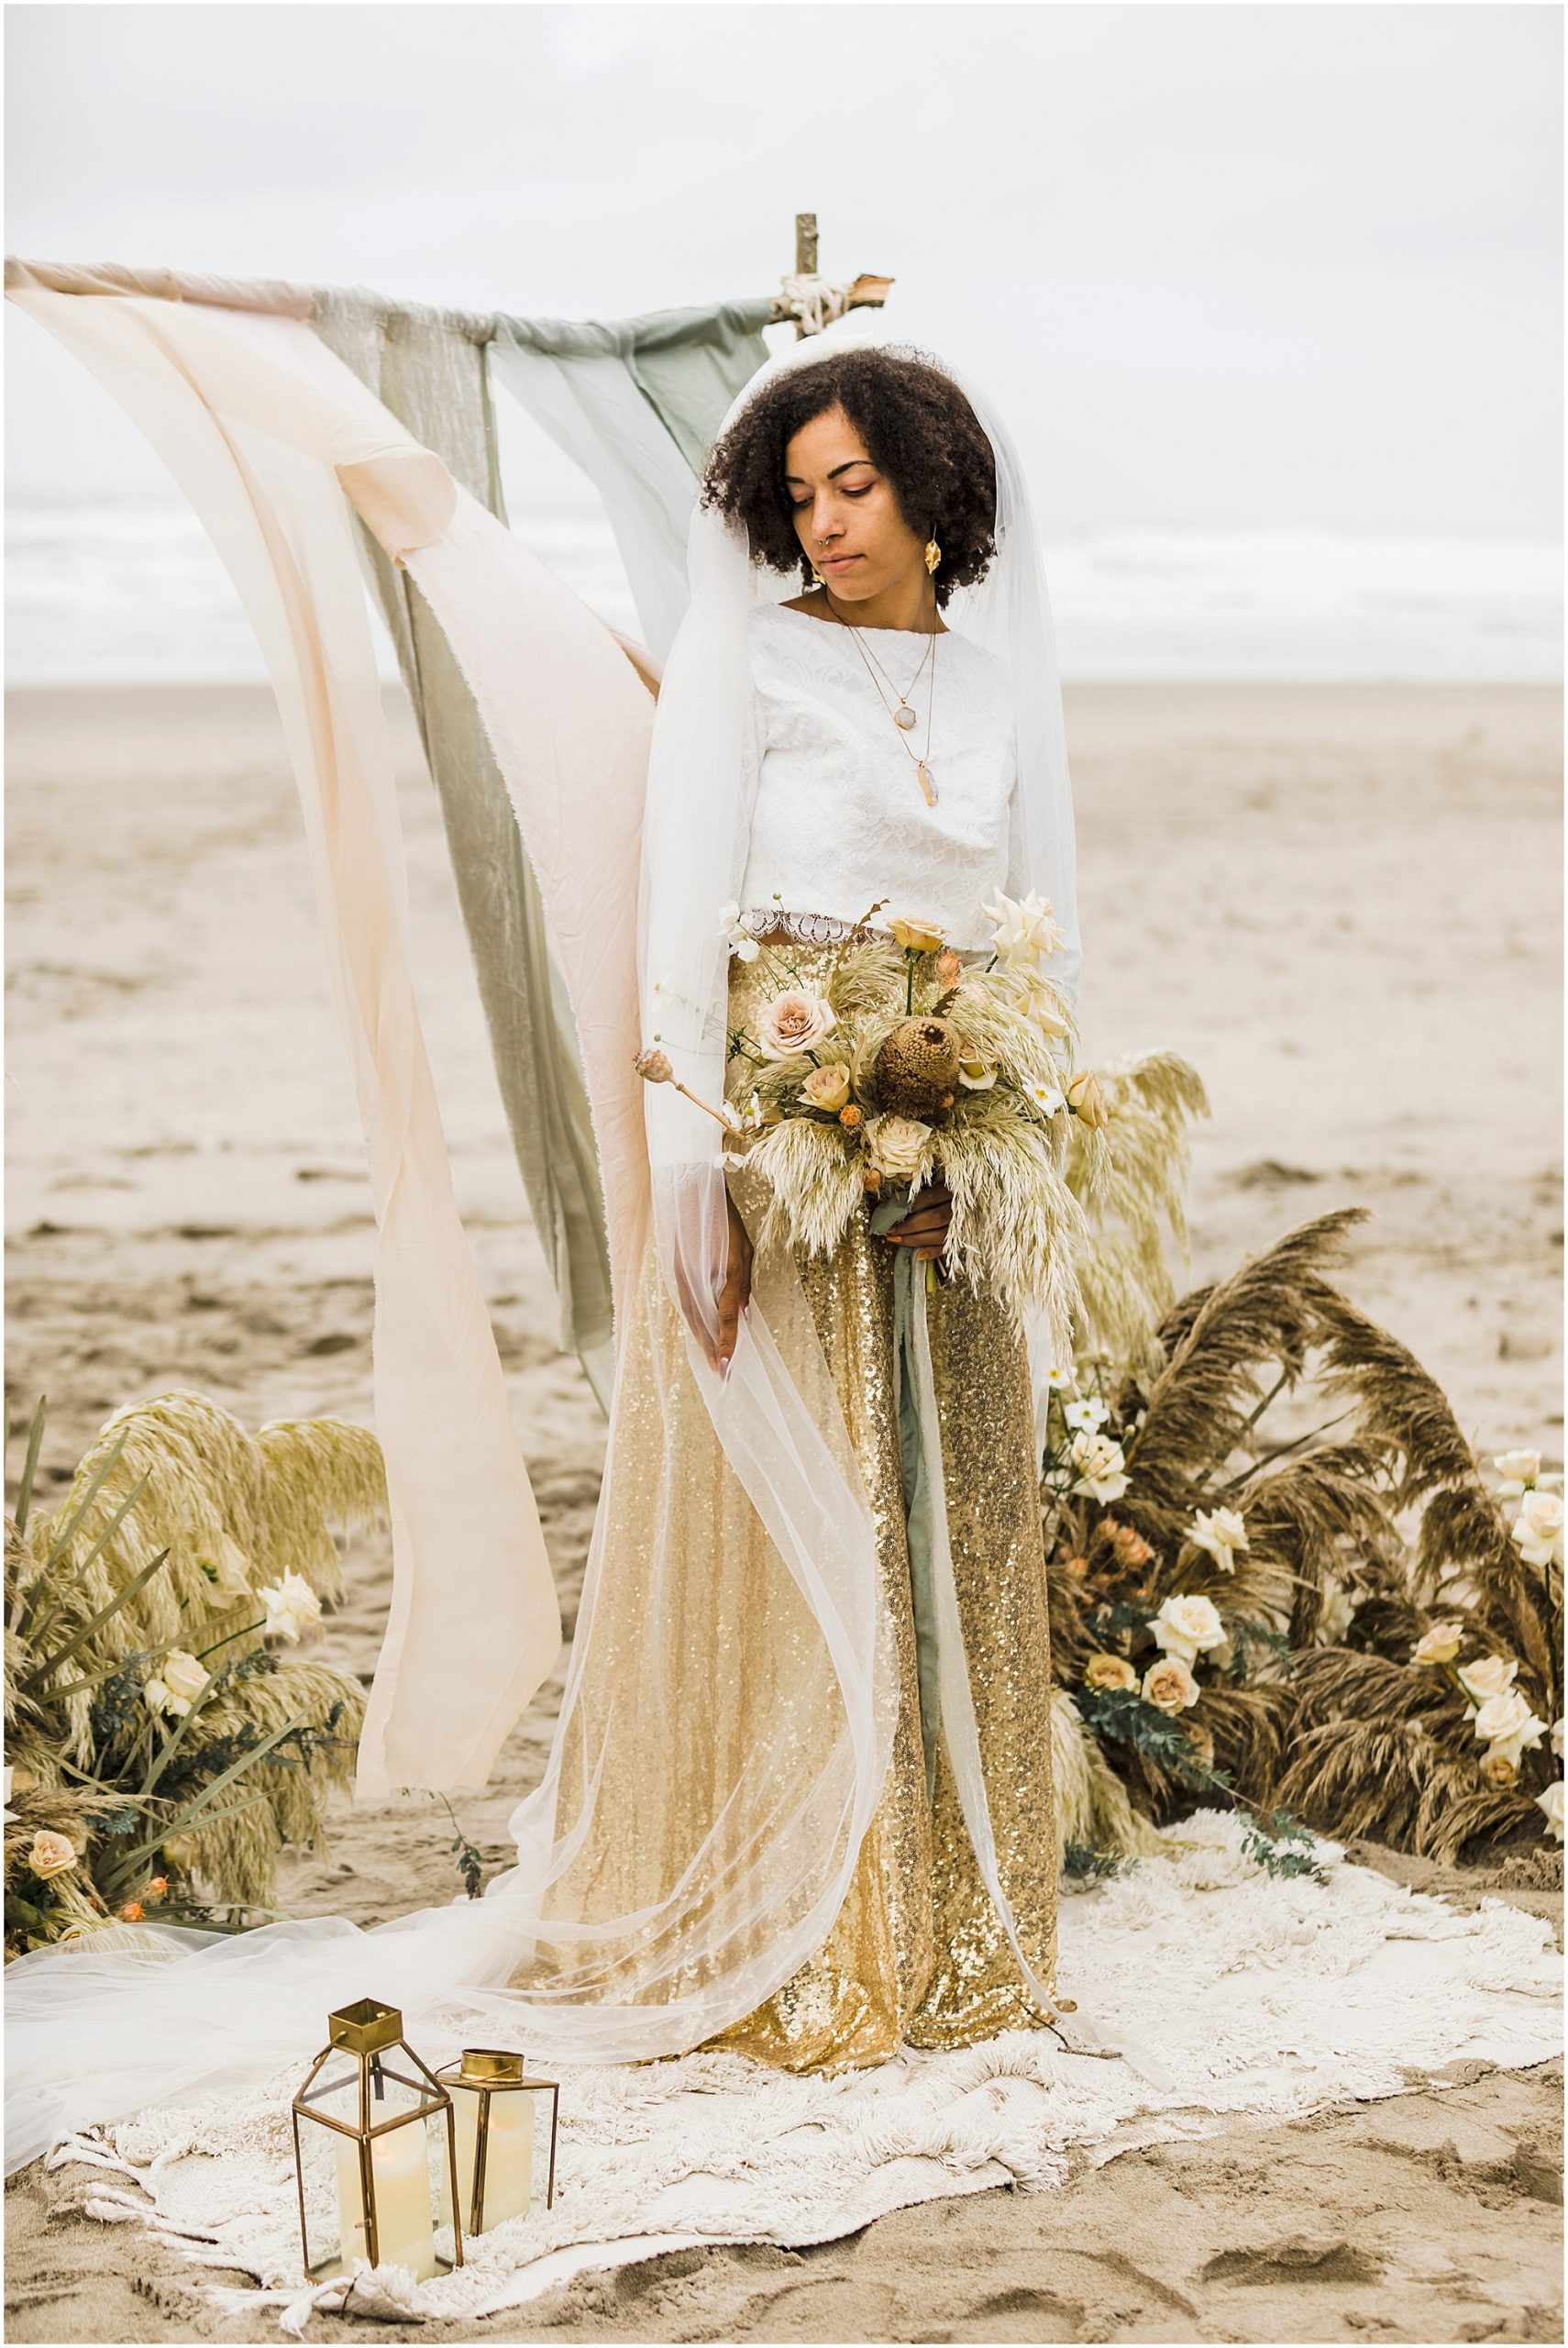 A beautiful black bride, wearing a white long sleeve cropped top, with a gorgeous gold sequined skirt stands on a cream rug in the sand. Behind her is the rustic wood arch with hand dyed silk ribbons in light blush, sage green and cream. Two large floral arrangements made of tall grasses and roses in a neutral color palette frame the arch, with the Pacific Ocean in the backdrop. | Erica Swantek Photography